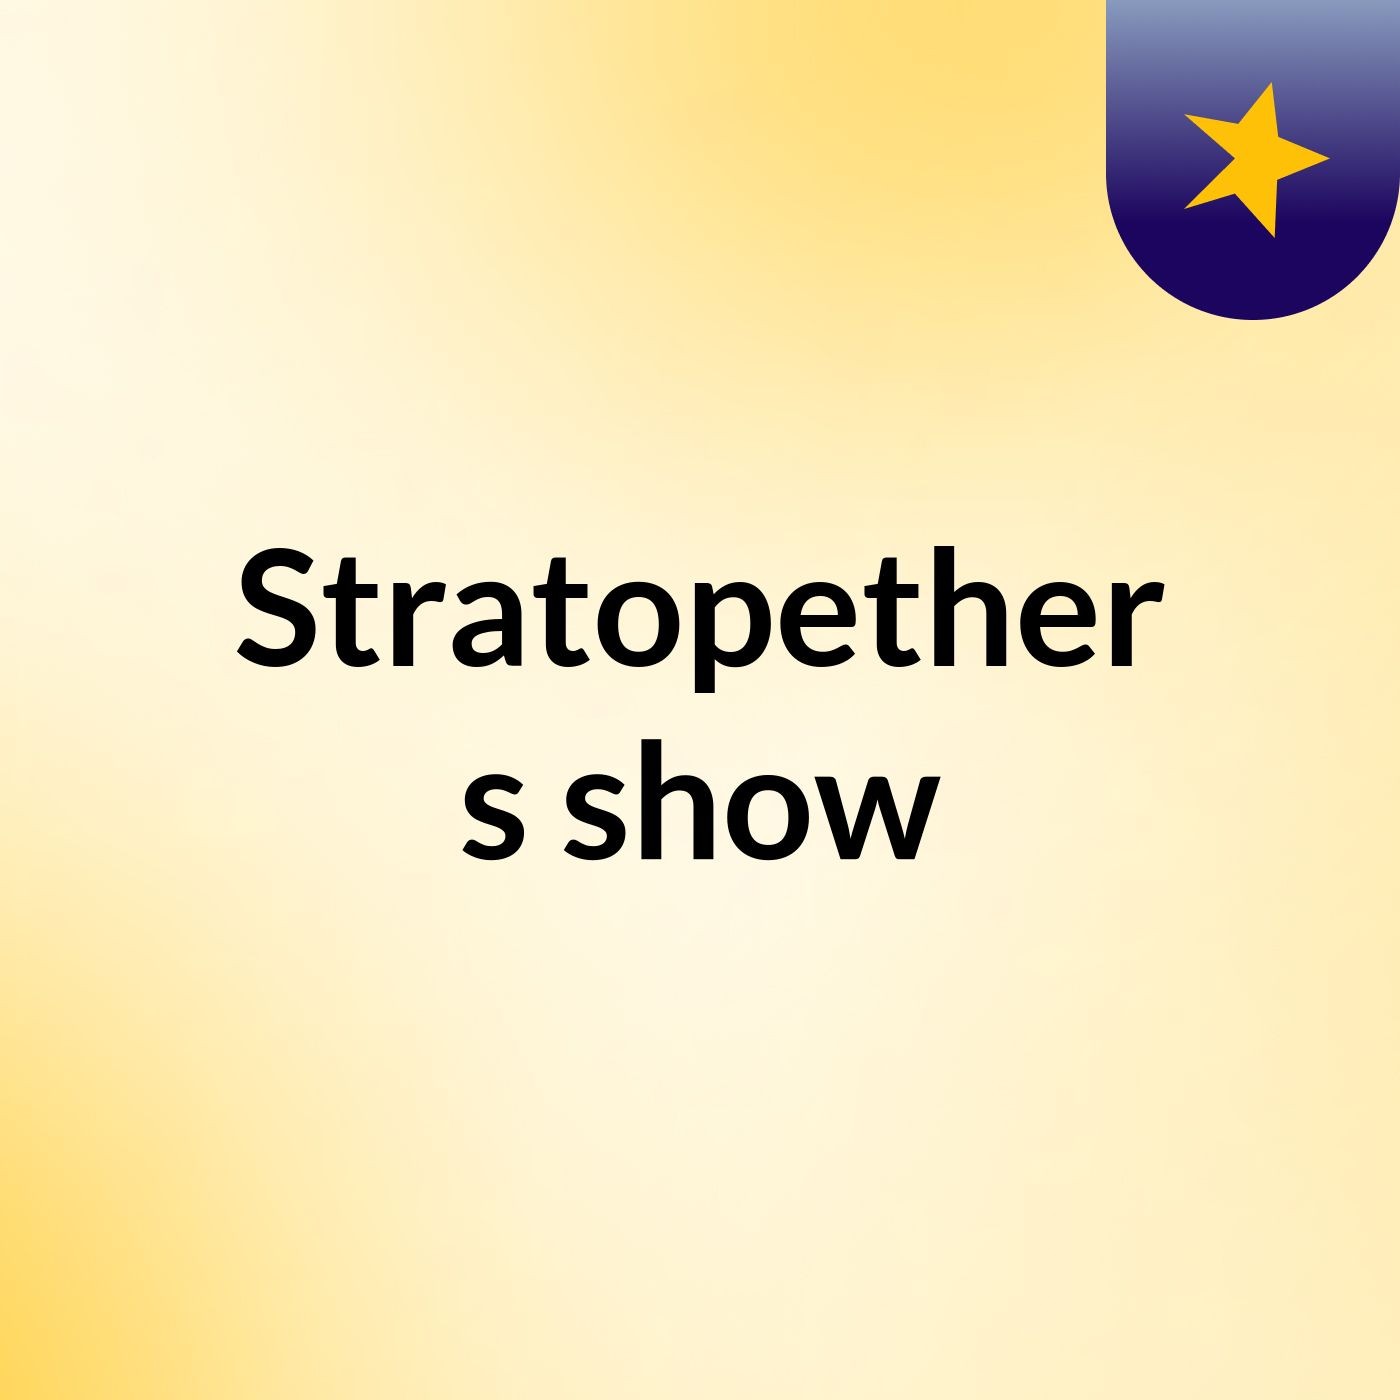 Stratopether's show